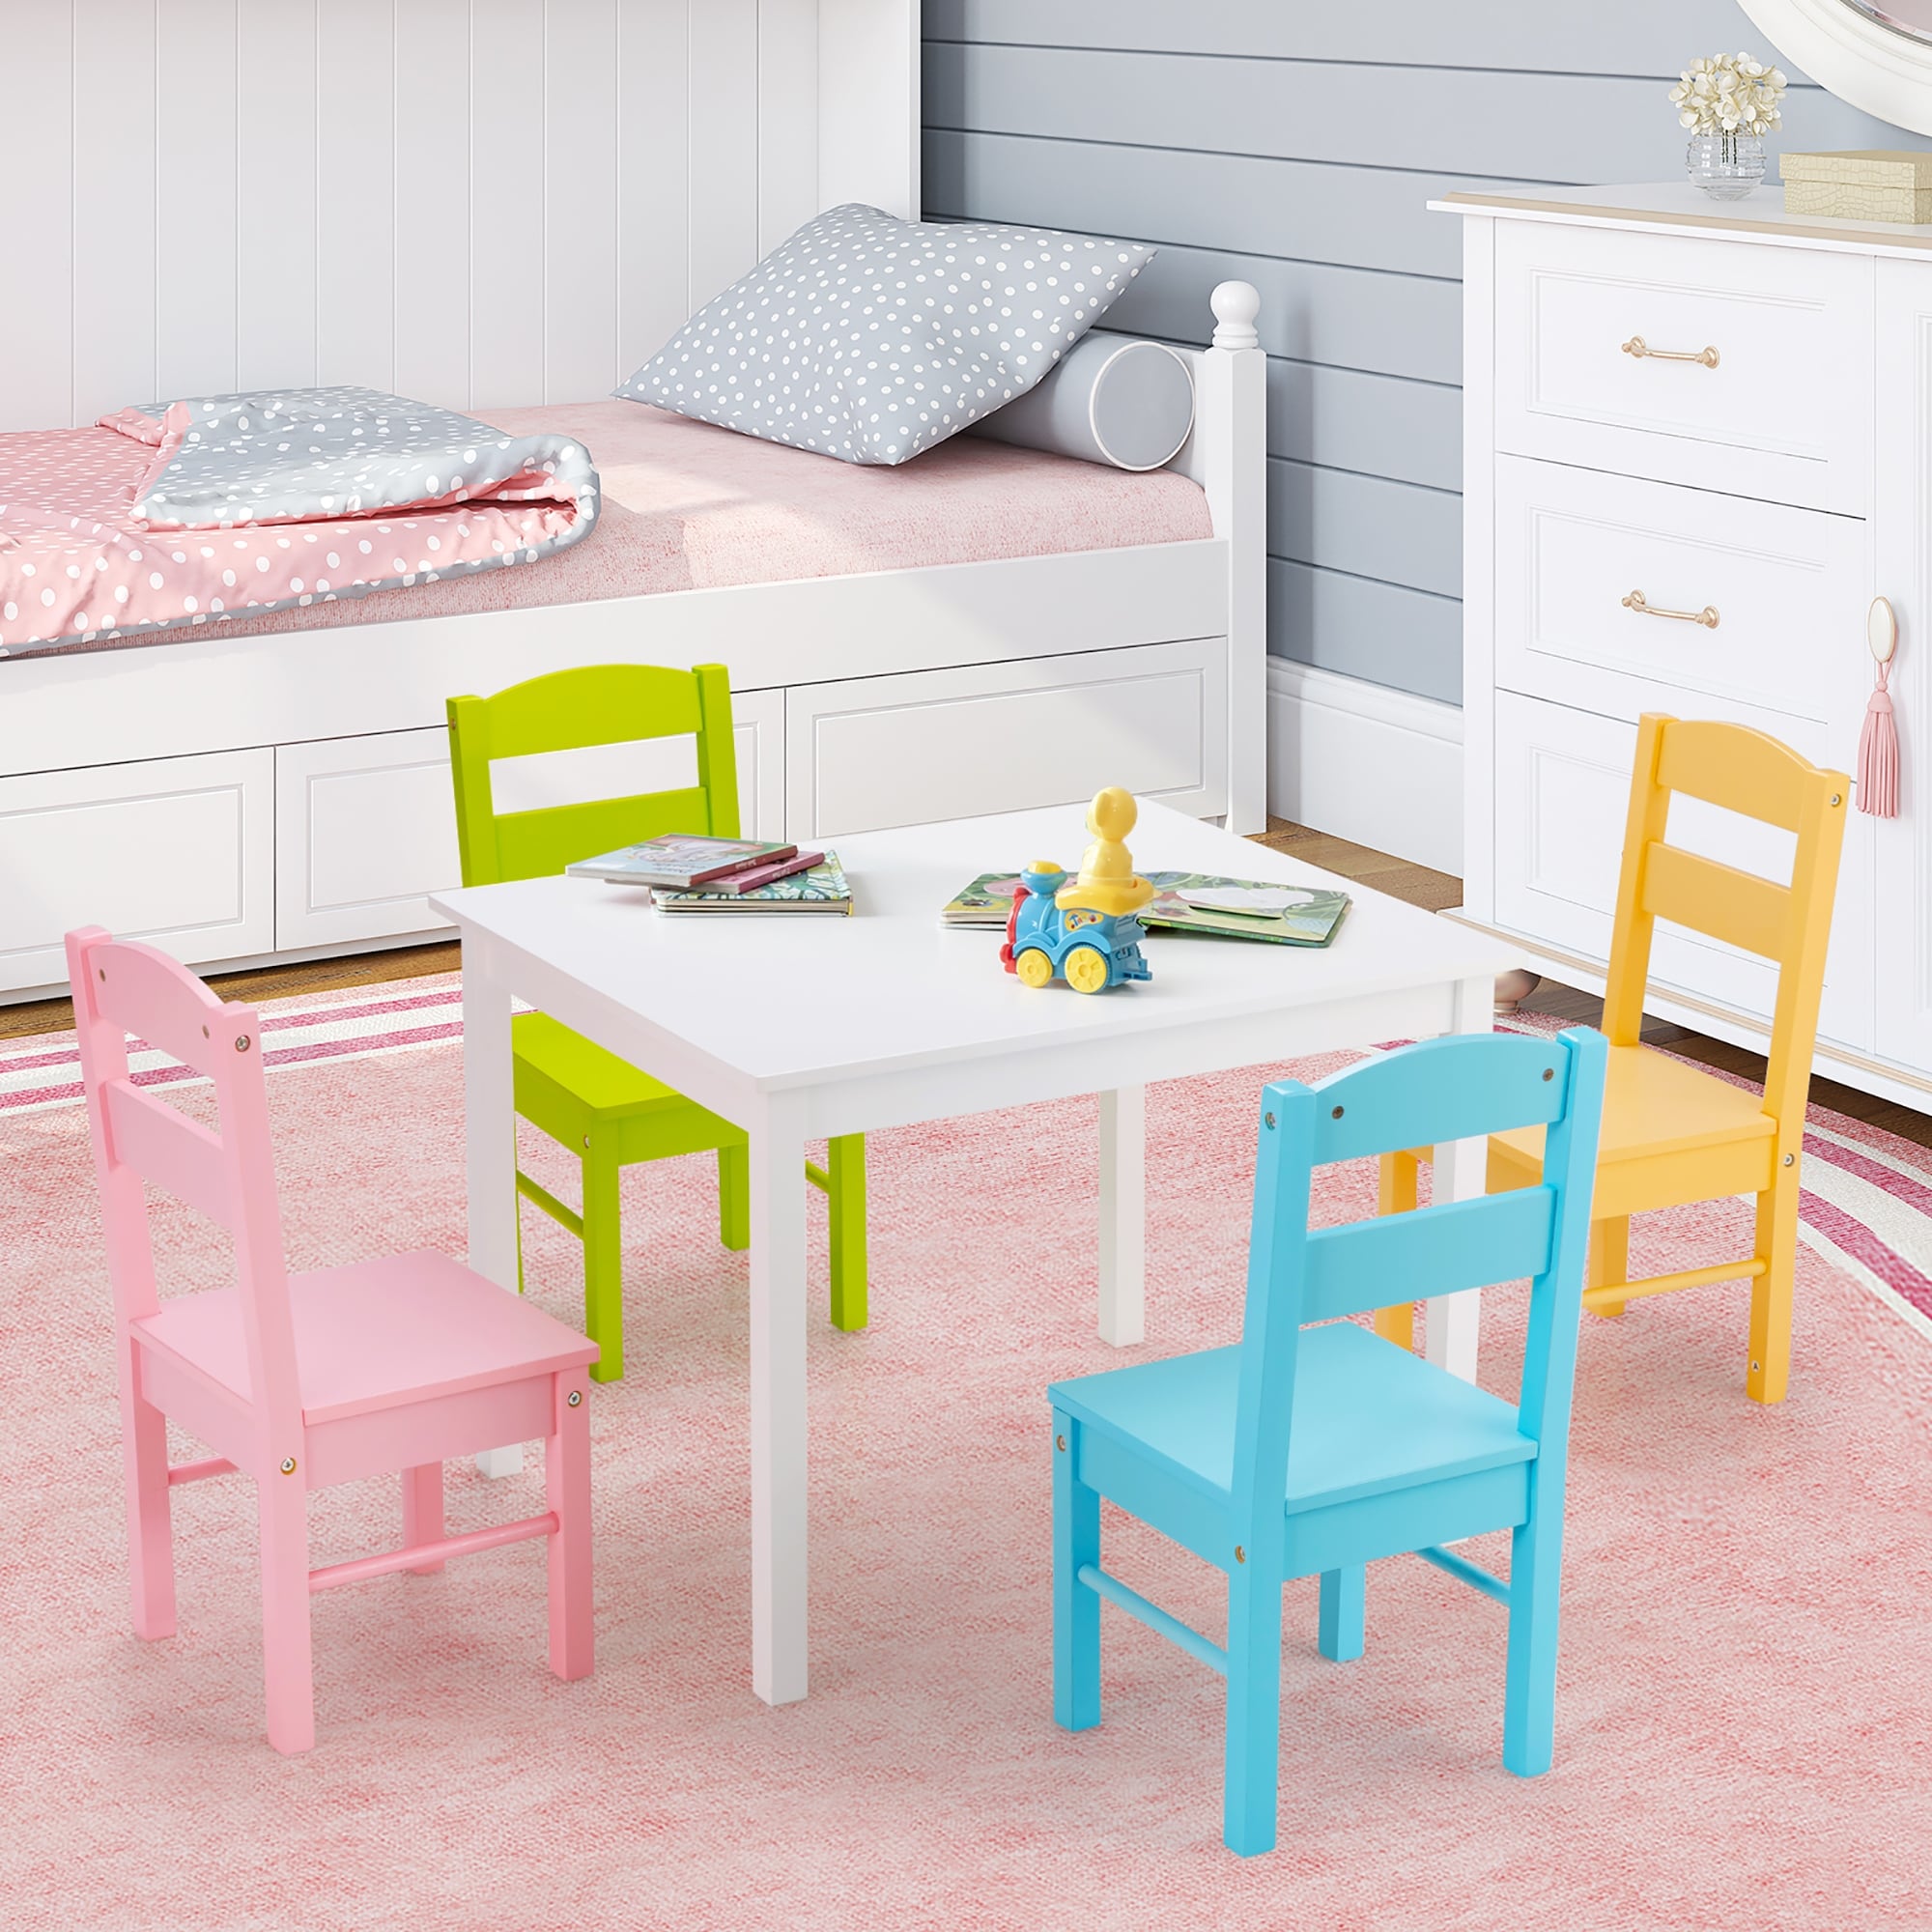 Costway 5 Piece Kids Wood Table Chair Set Activity Toddler Playroom Furniture Colorful